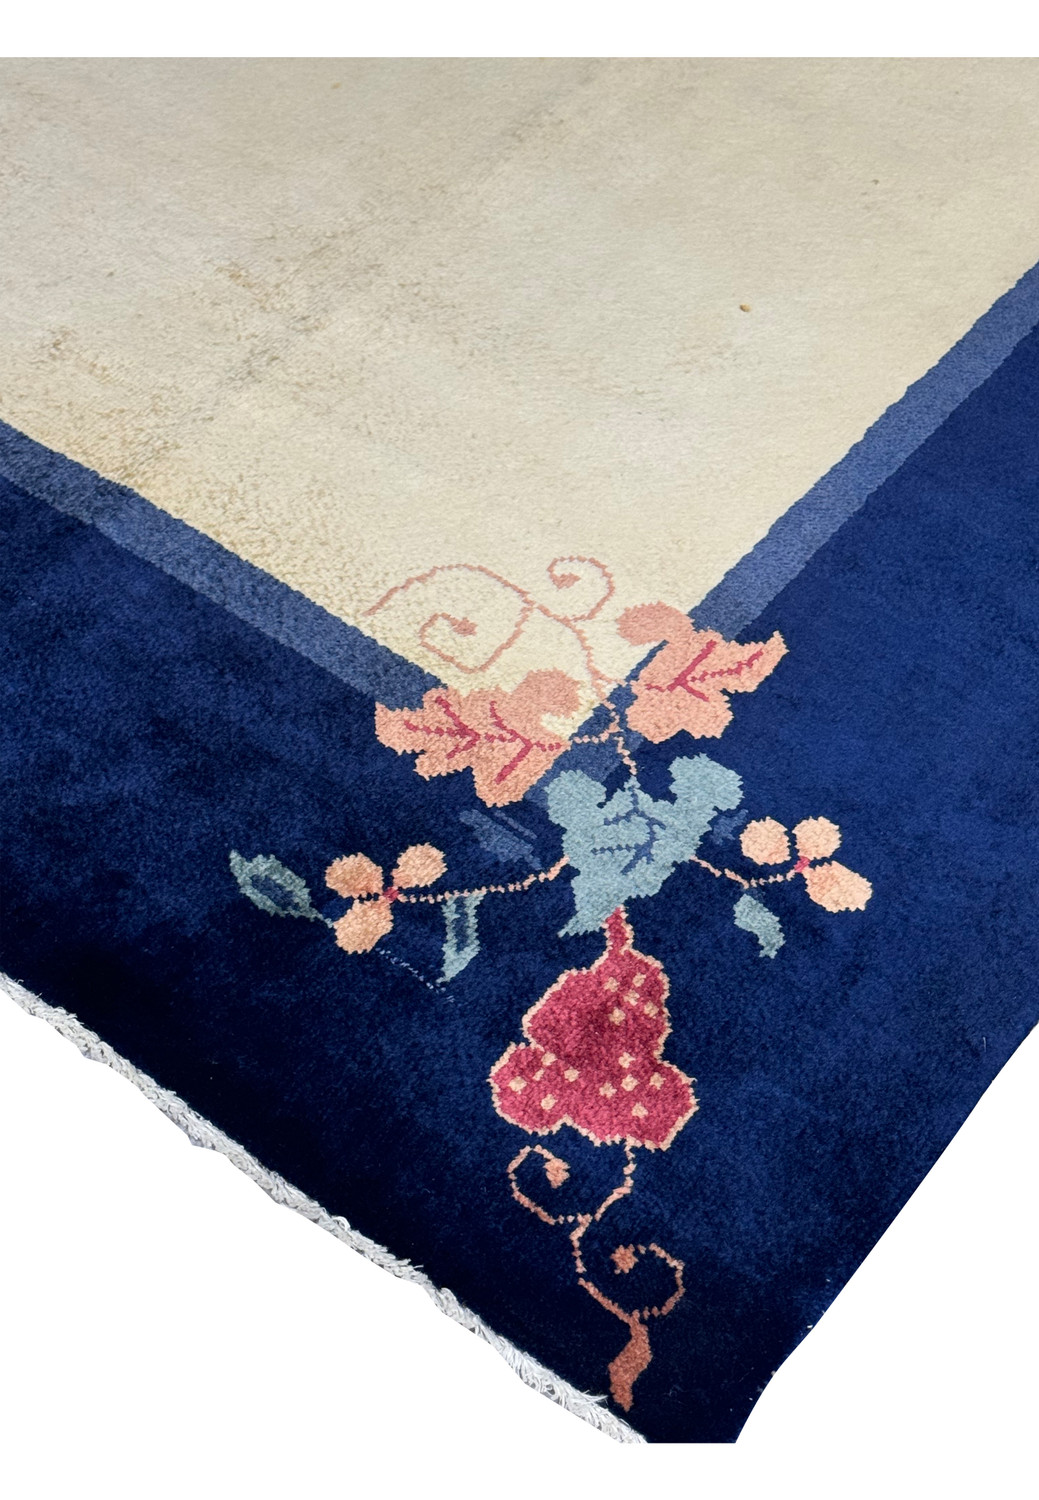 Angled close-up showing the texture and thickness of the vintage Art Deco rug with a navy border and beige center